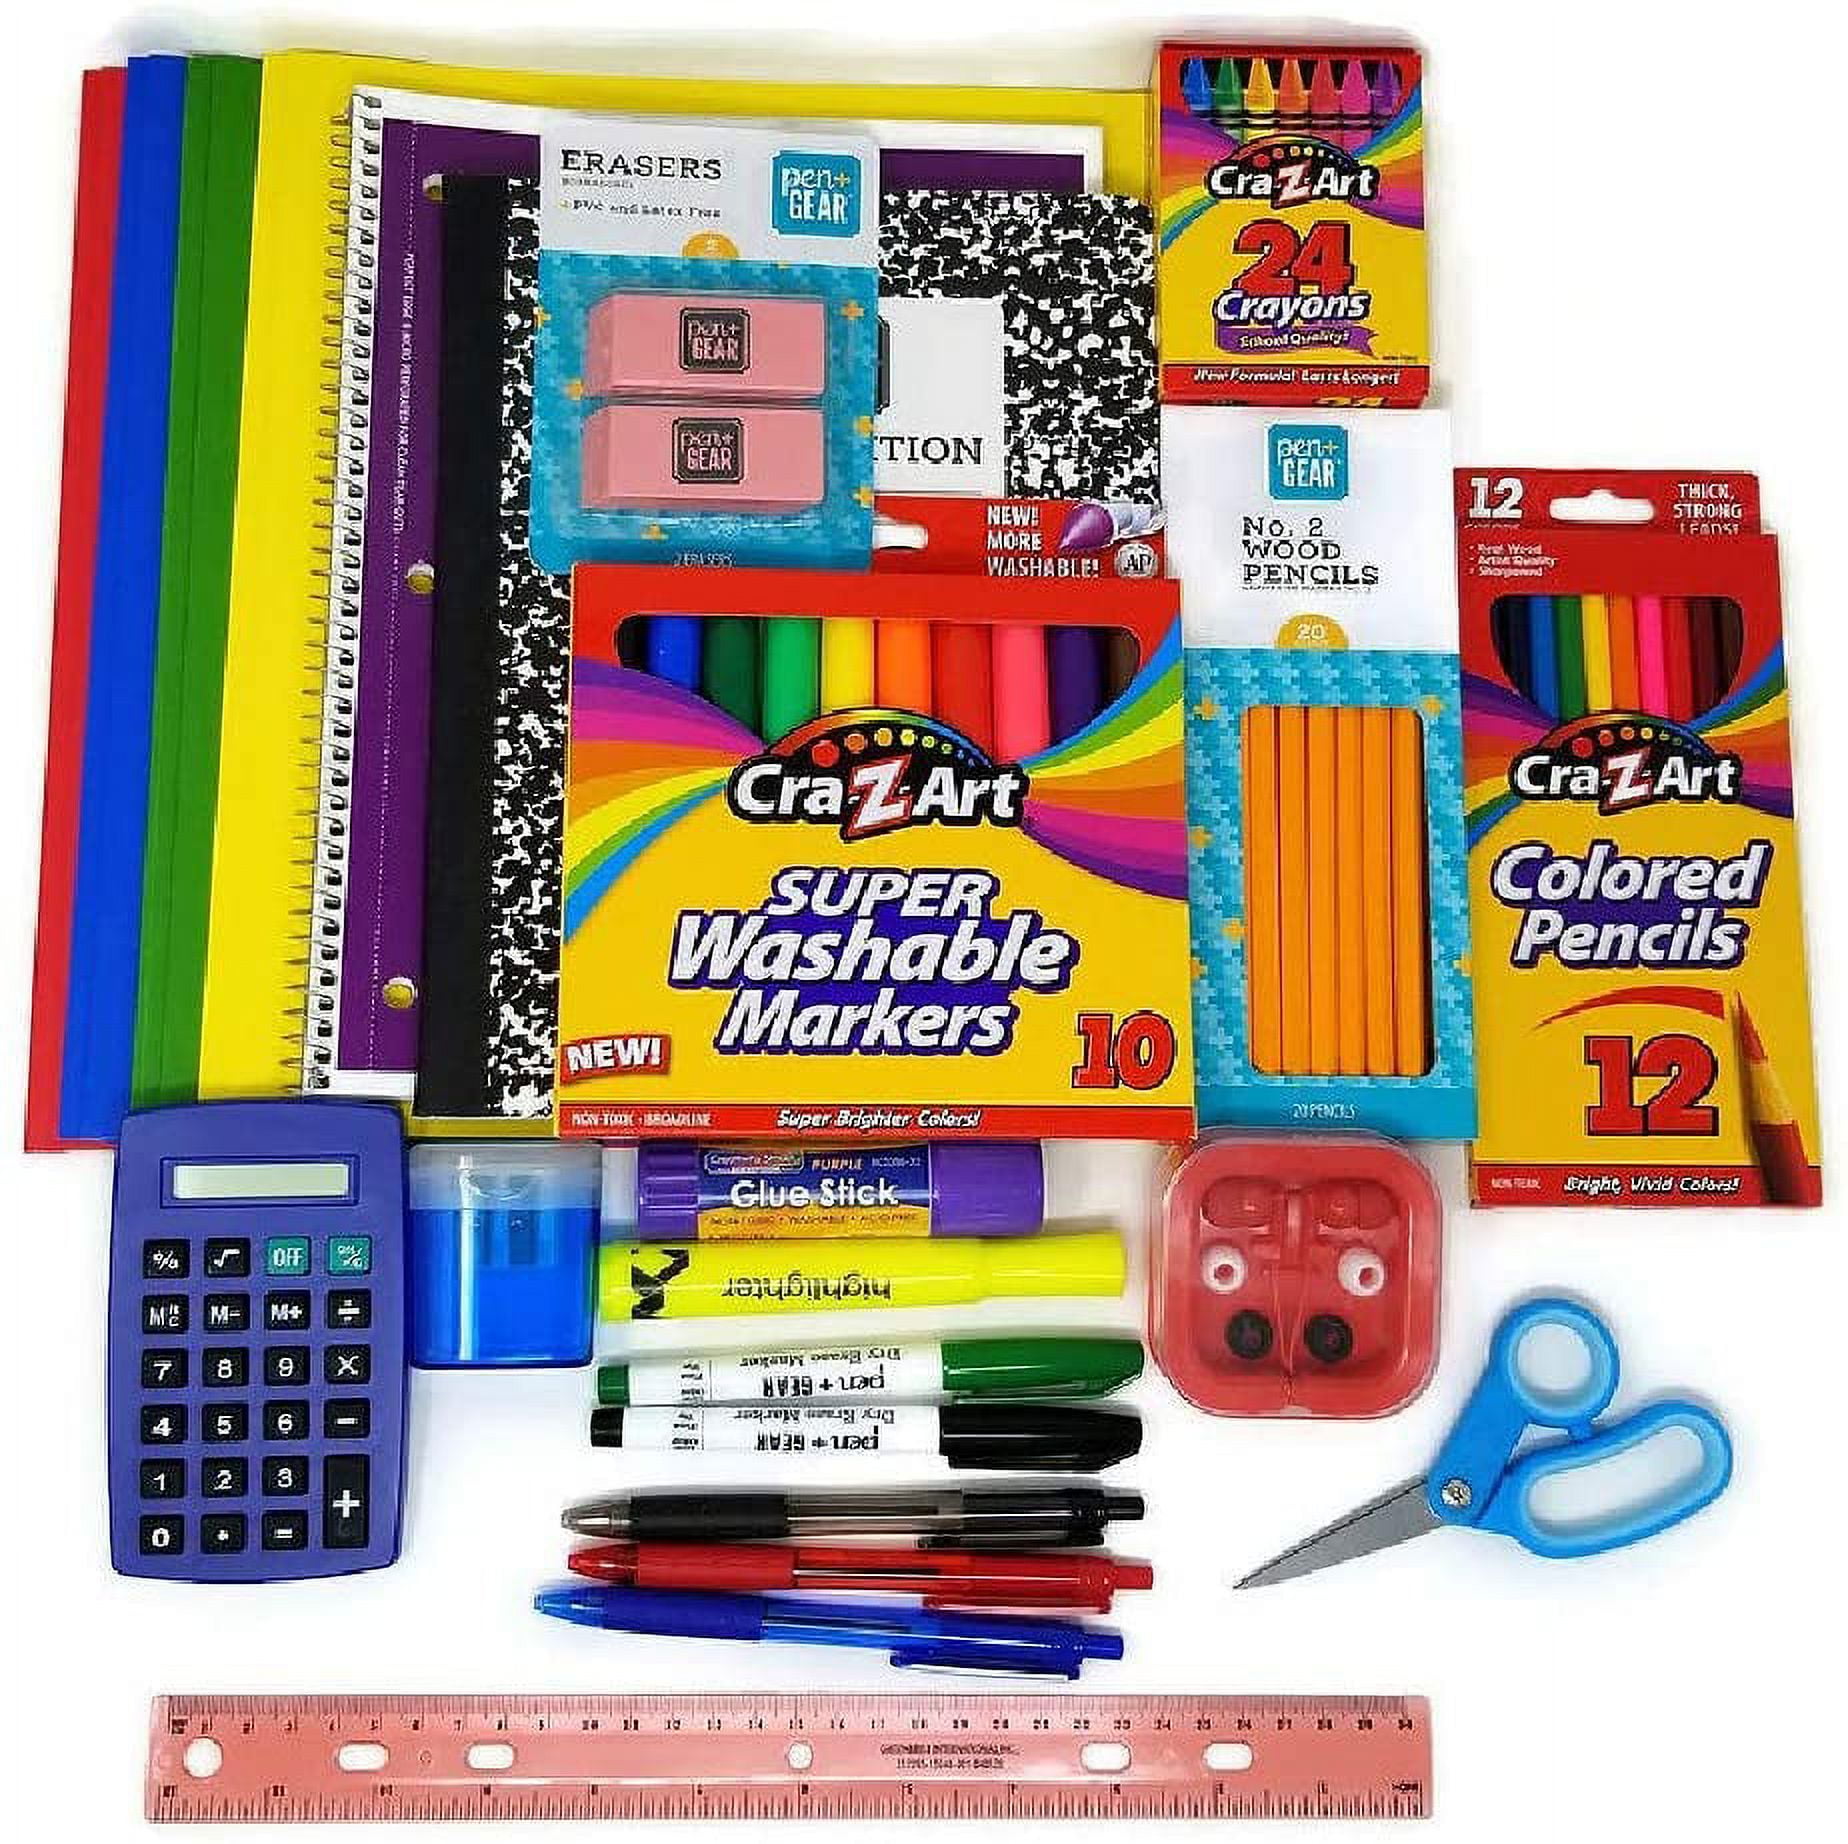  Secondary School Supply Pack - 25 Essential Items for